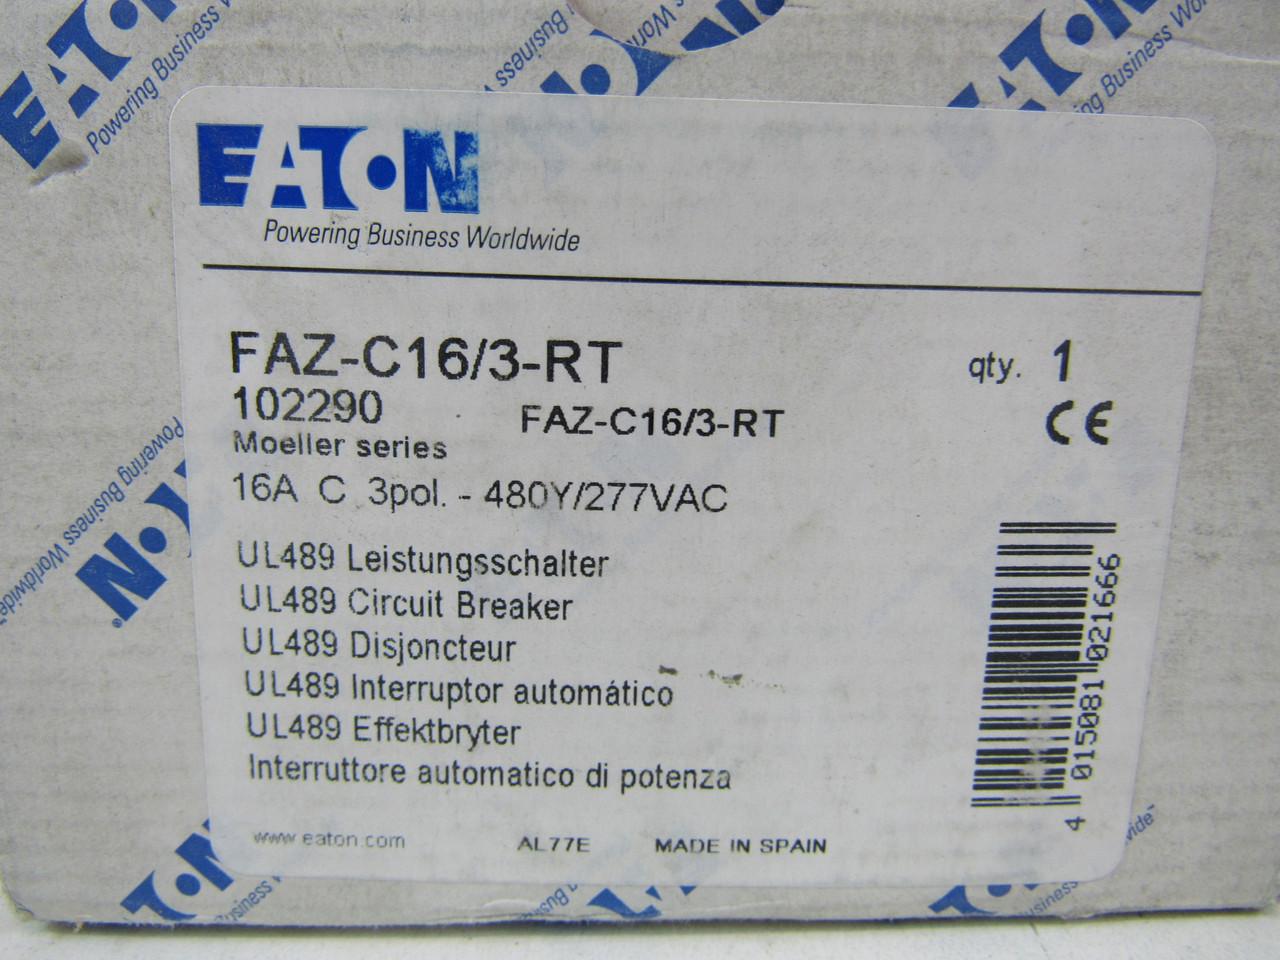 Eaton FAZ-C16/3-RT 277/480 VAC 50/60 Hz, 16 A, 3-Pole, 10/14 kA, 5 to 10 x Rated Current, Ring Tongue Terminal, DIN Rail Mount, Standard Packaging, C-Curve, Current Limiting, Thermal Magnetic